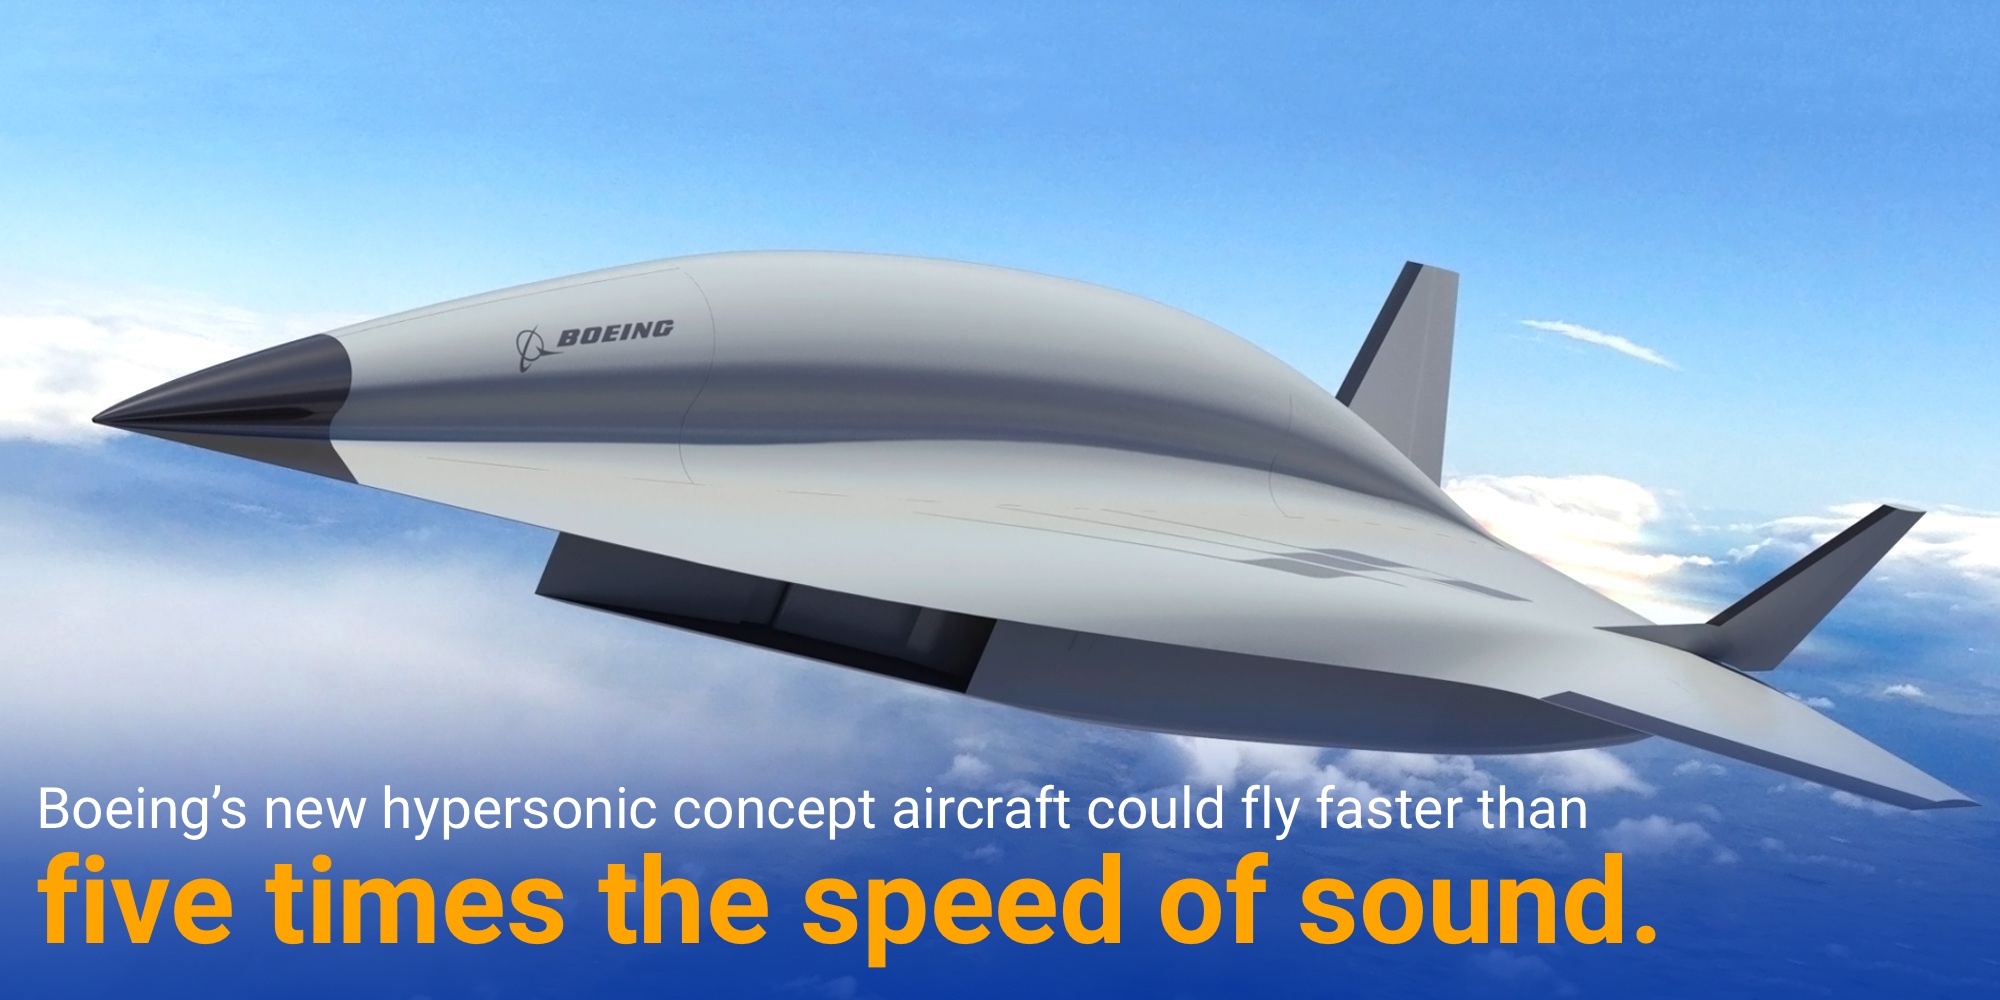 Boeing's new hypersonic concept aircraft could fly faster than five times the speed of sound.